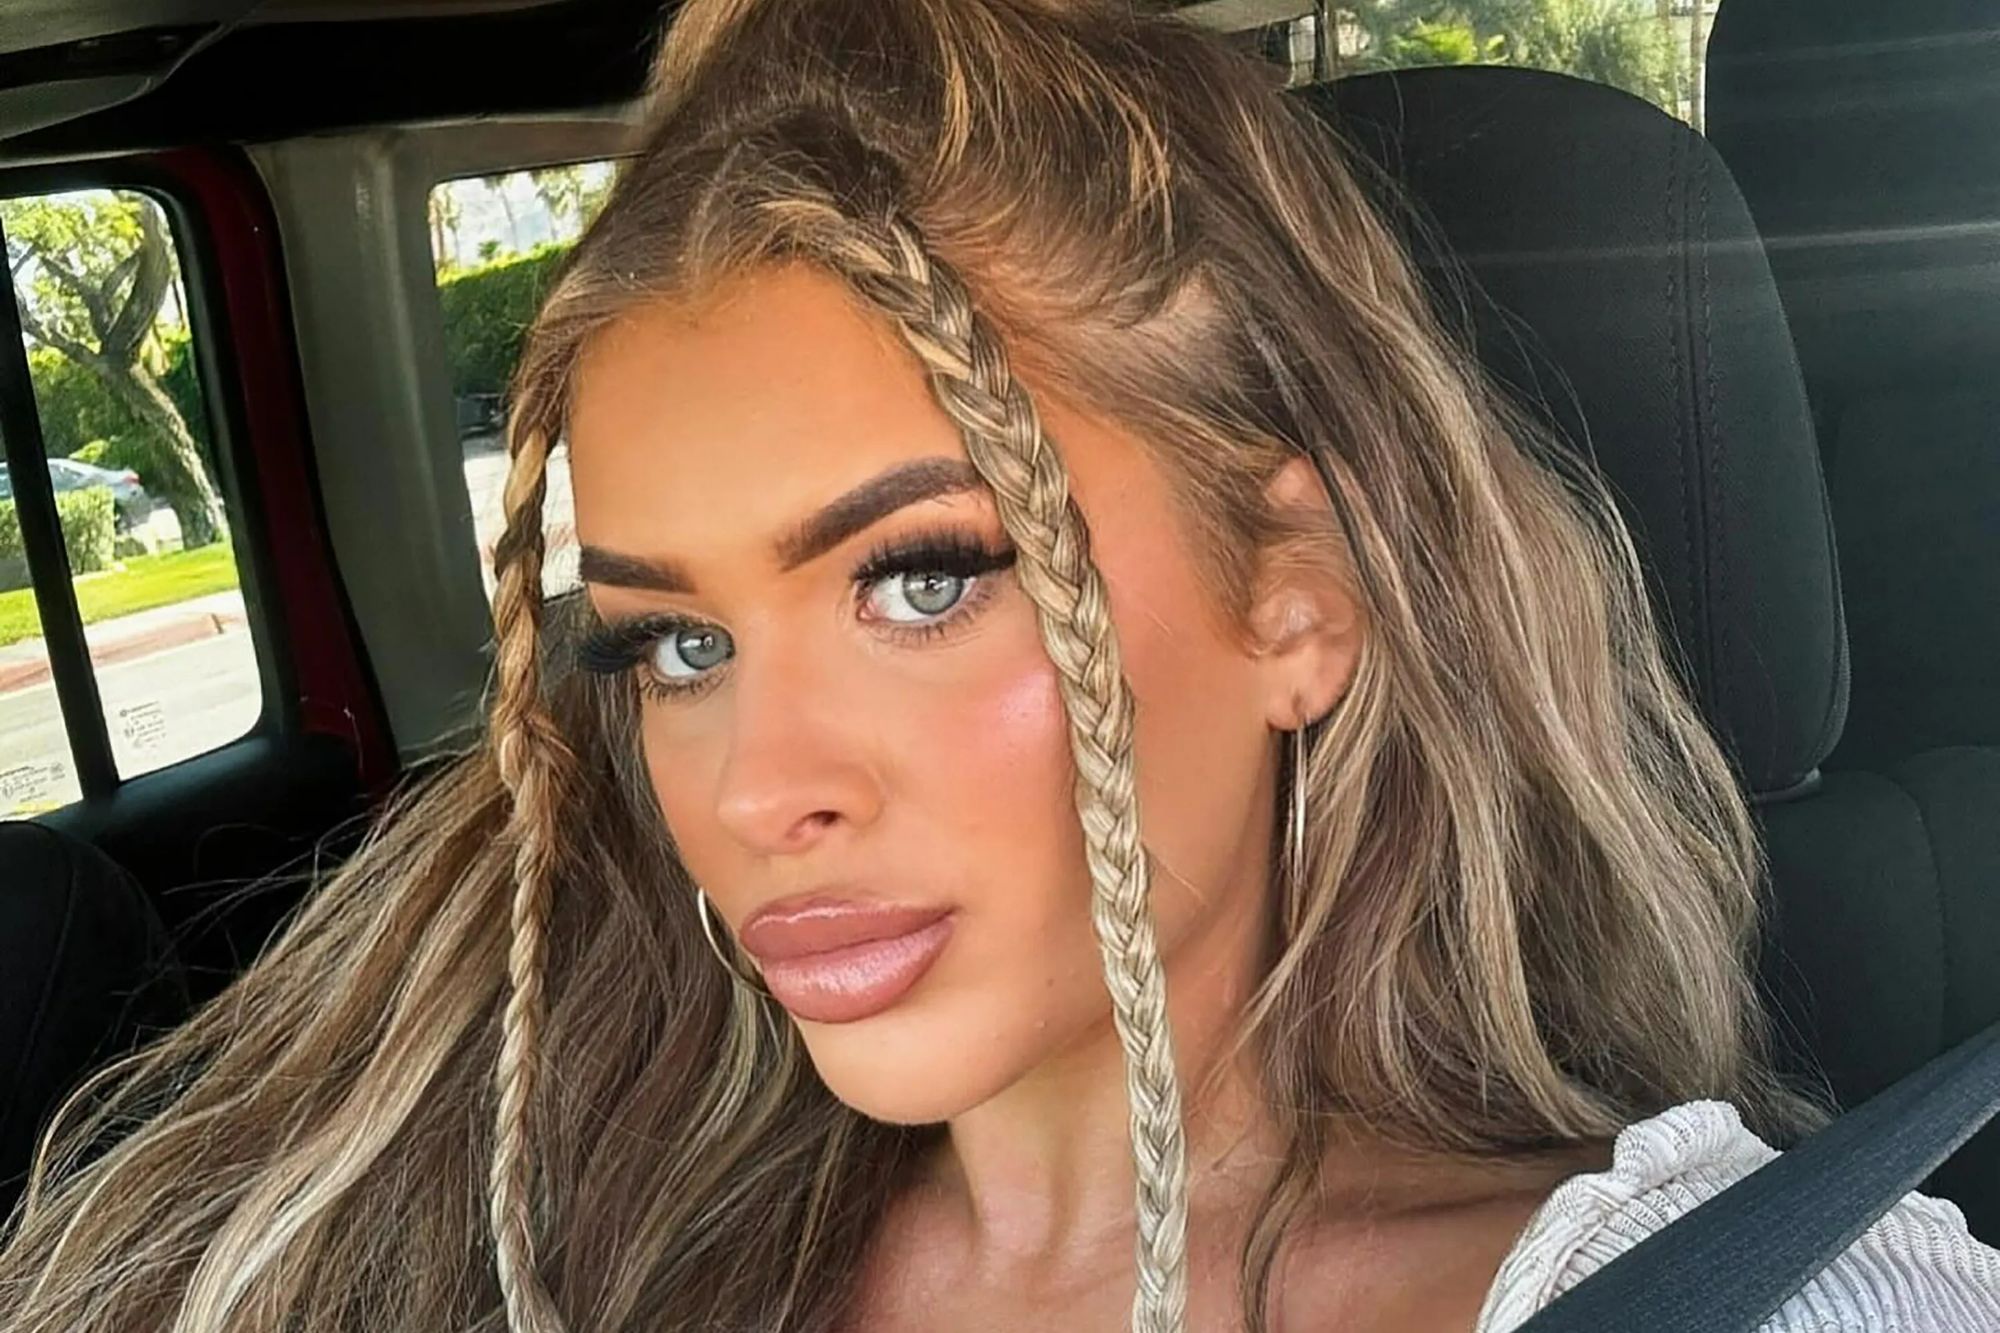 Liberty Poole sparks rumours she’s feuding with Love Island co-stars